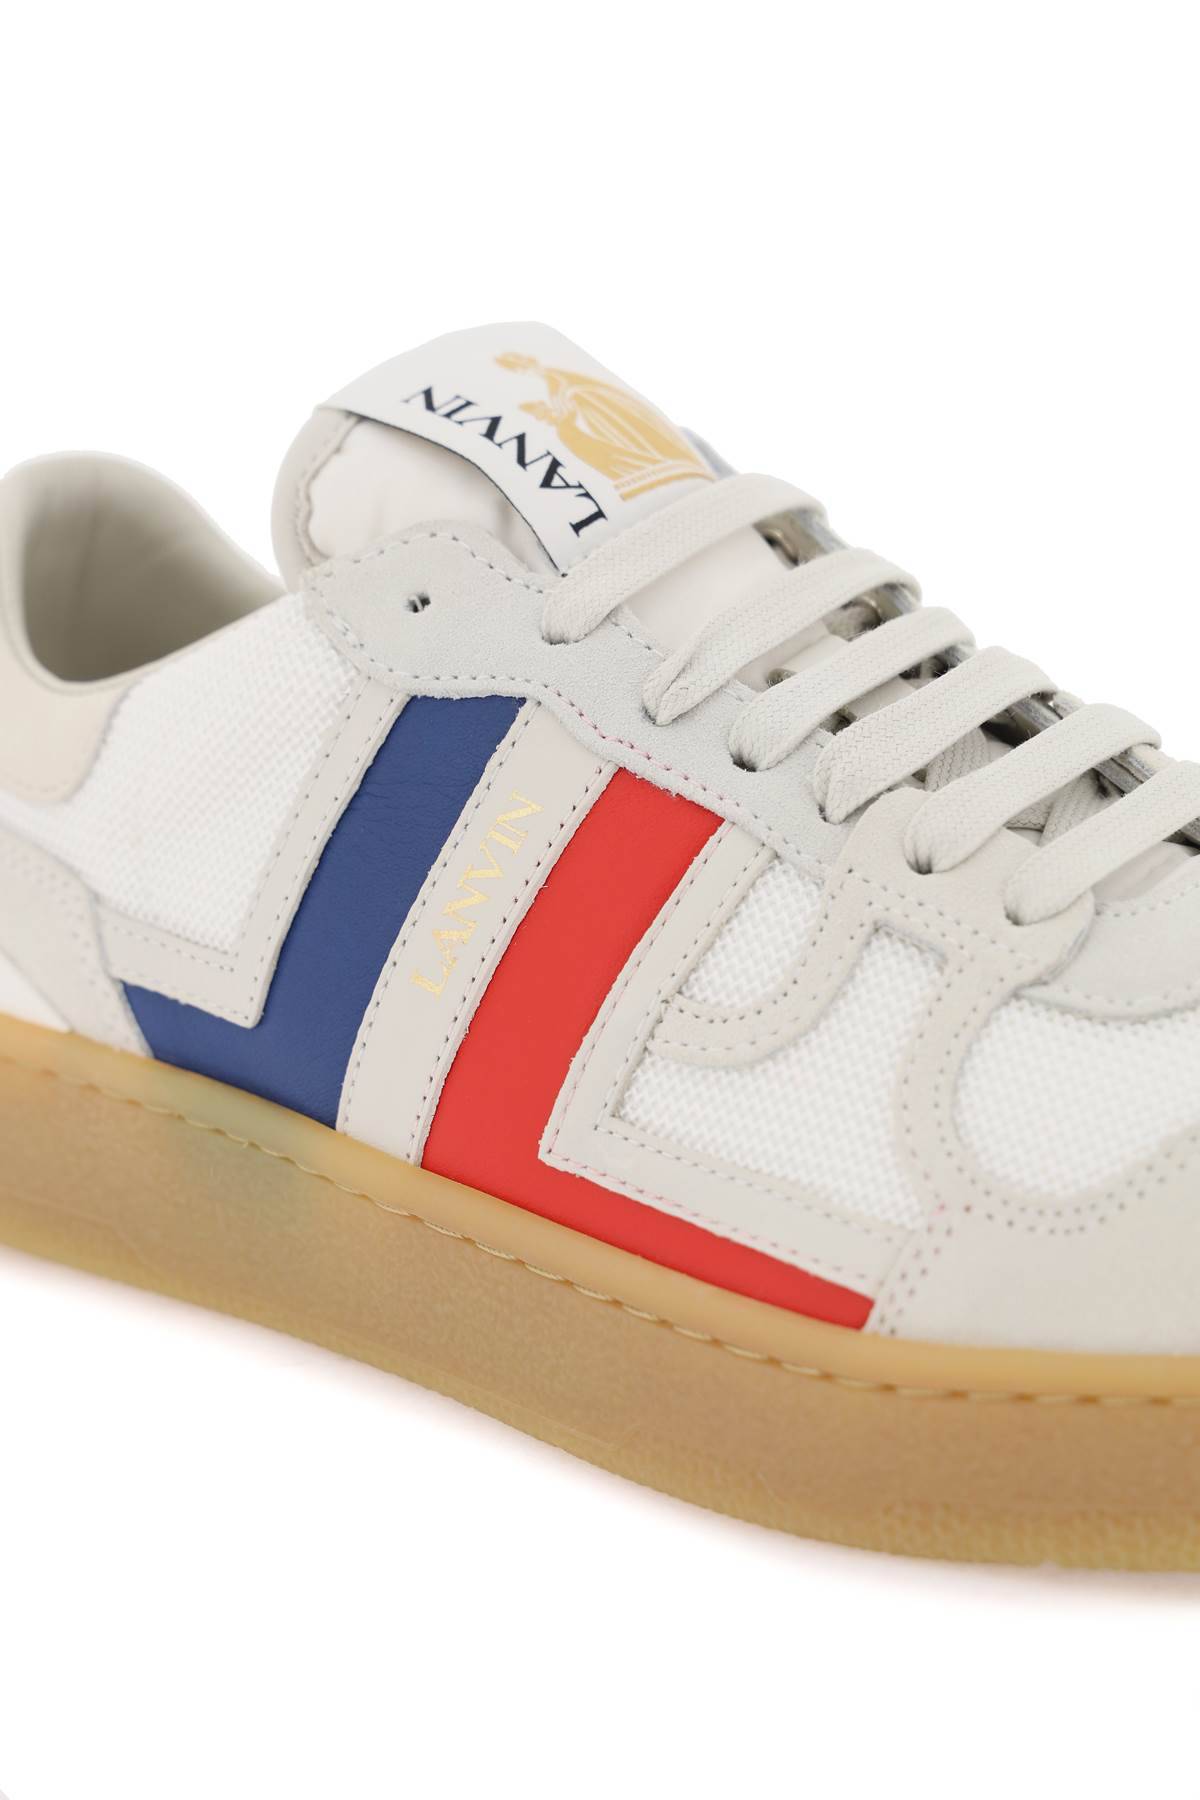 Shop Lanvin Clay Sneakers In White,blue,red